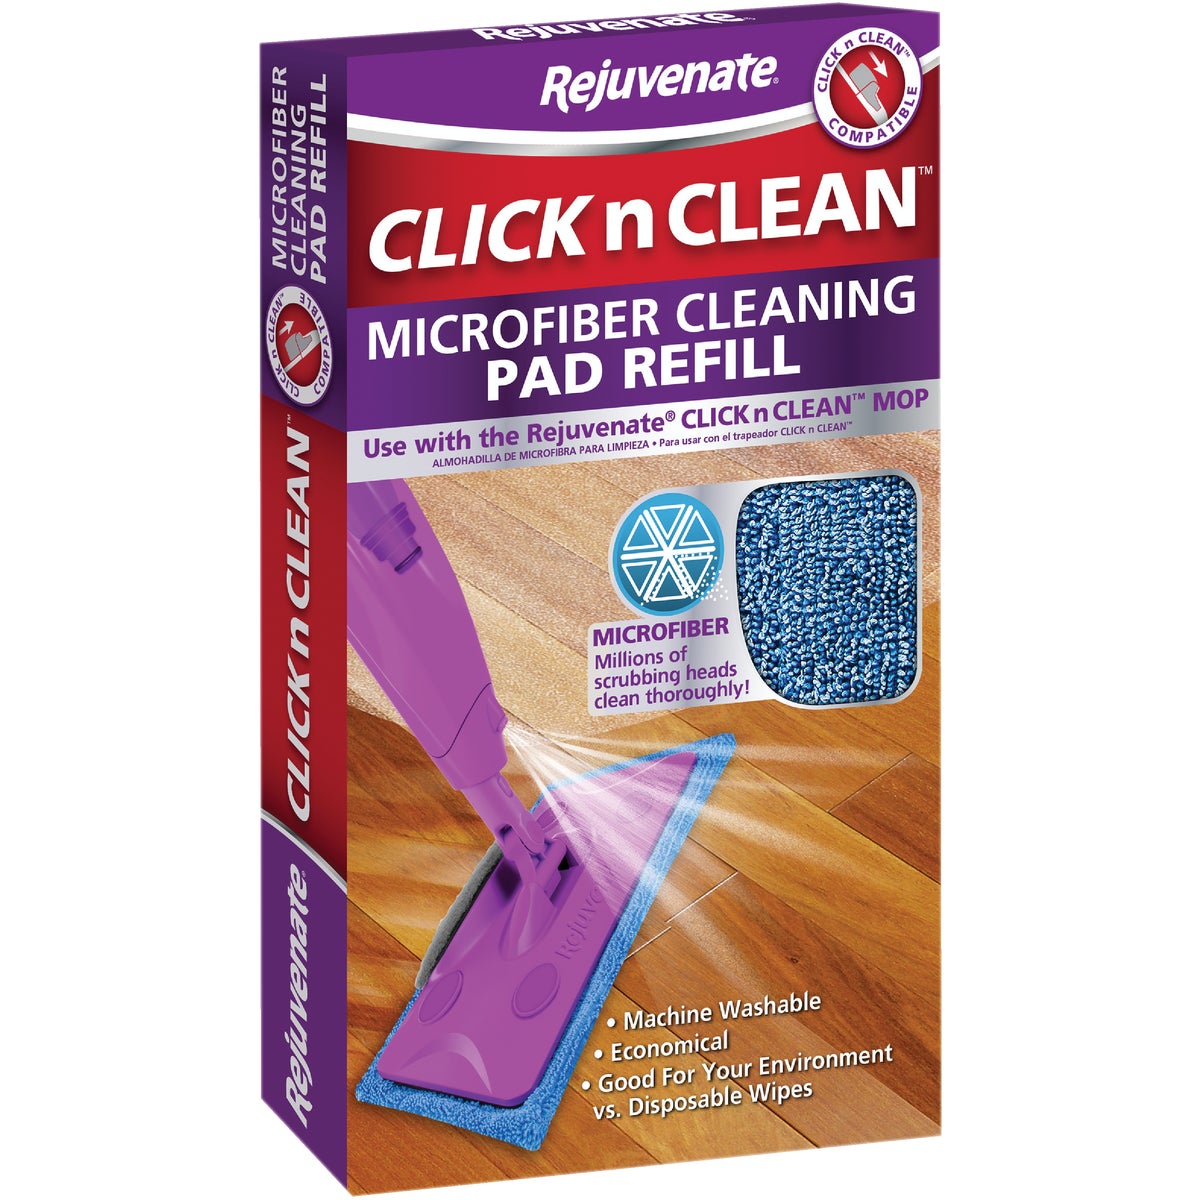 Item 601457, Maximize the cleaning power of Rejuvenate Products with this Click n Clean 